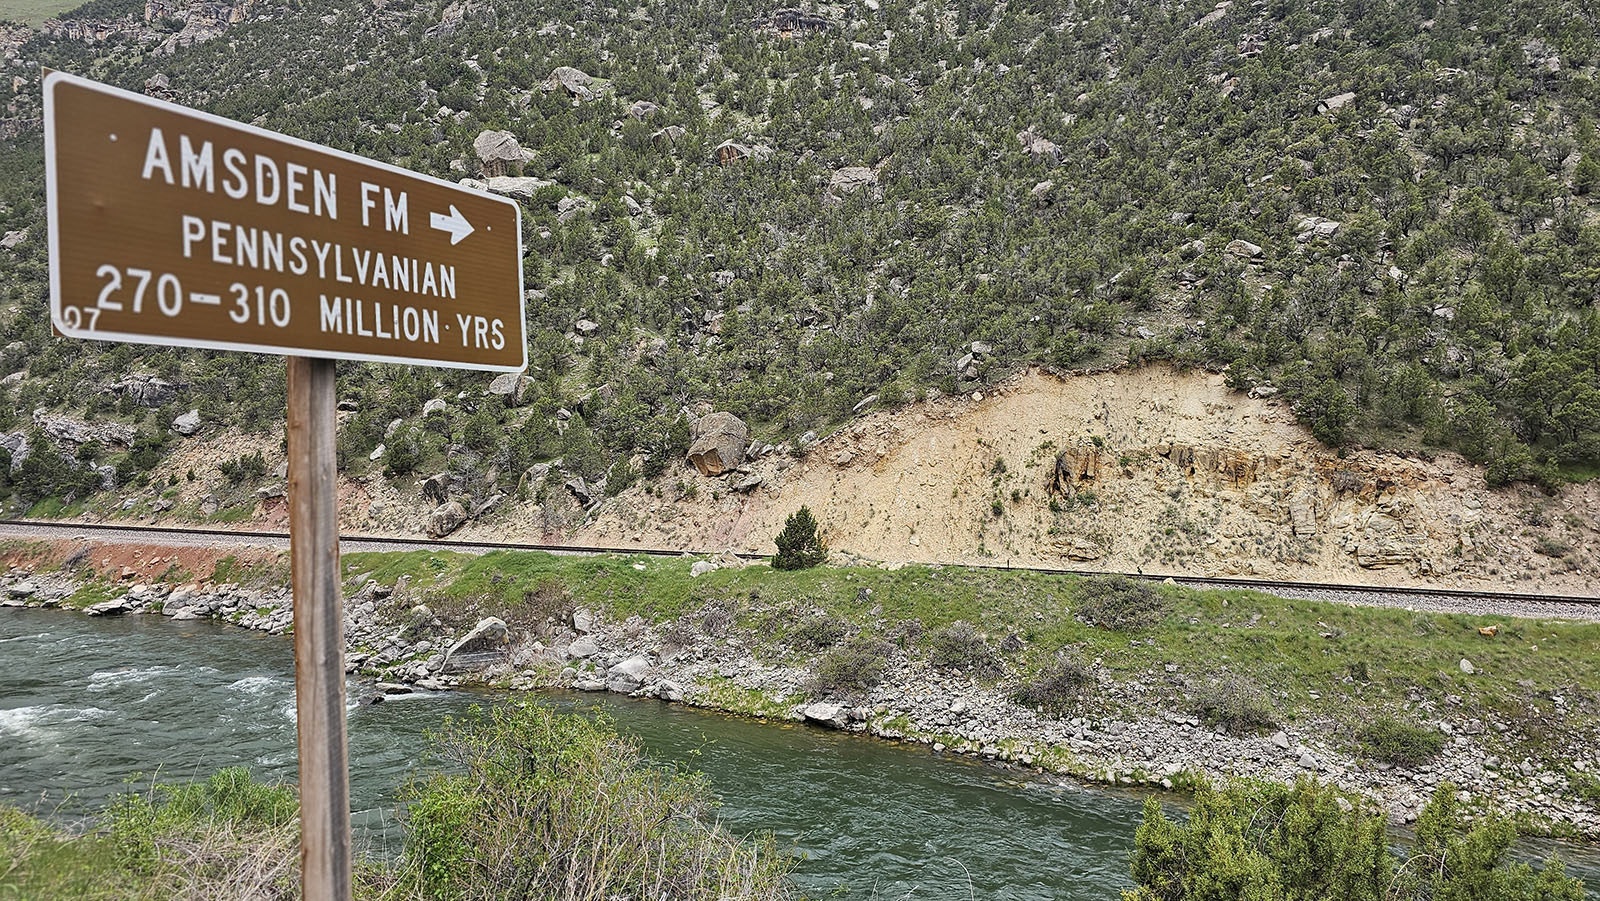 Signs along the Wind River Canyon point out the layers of time that each rocky deposit represents.